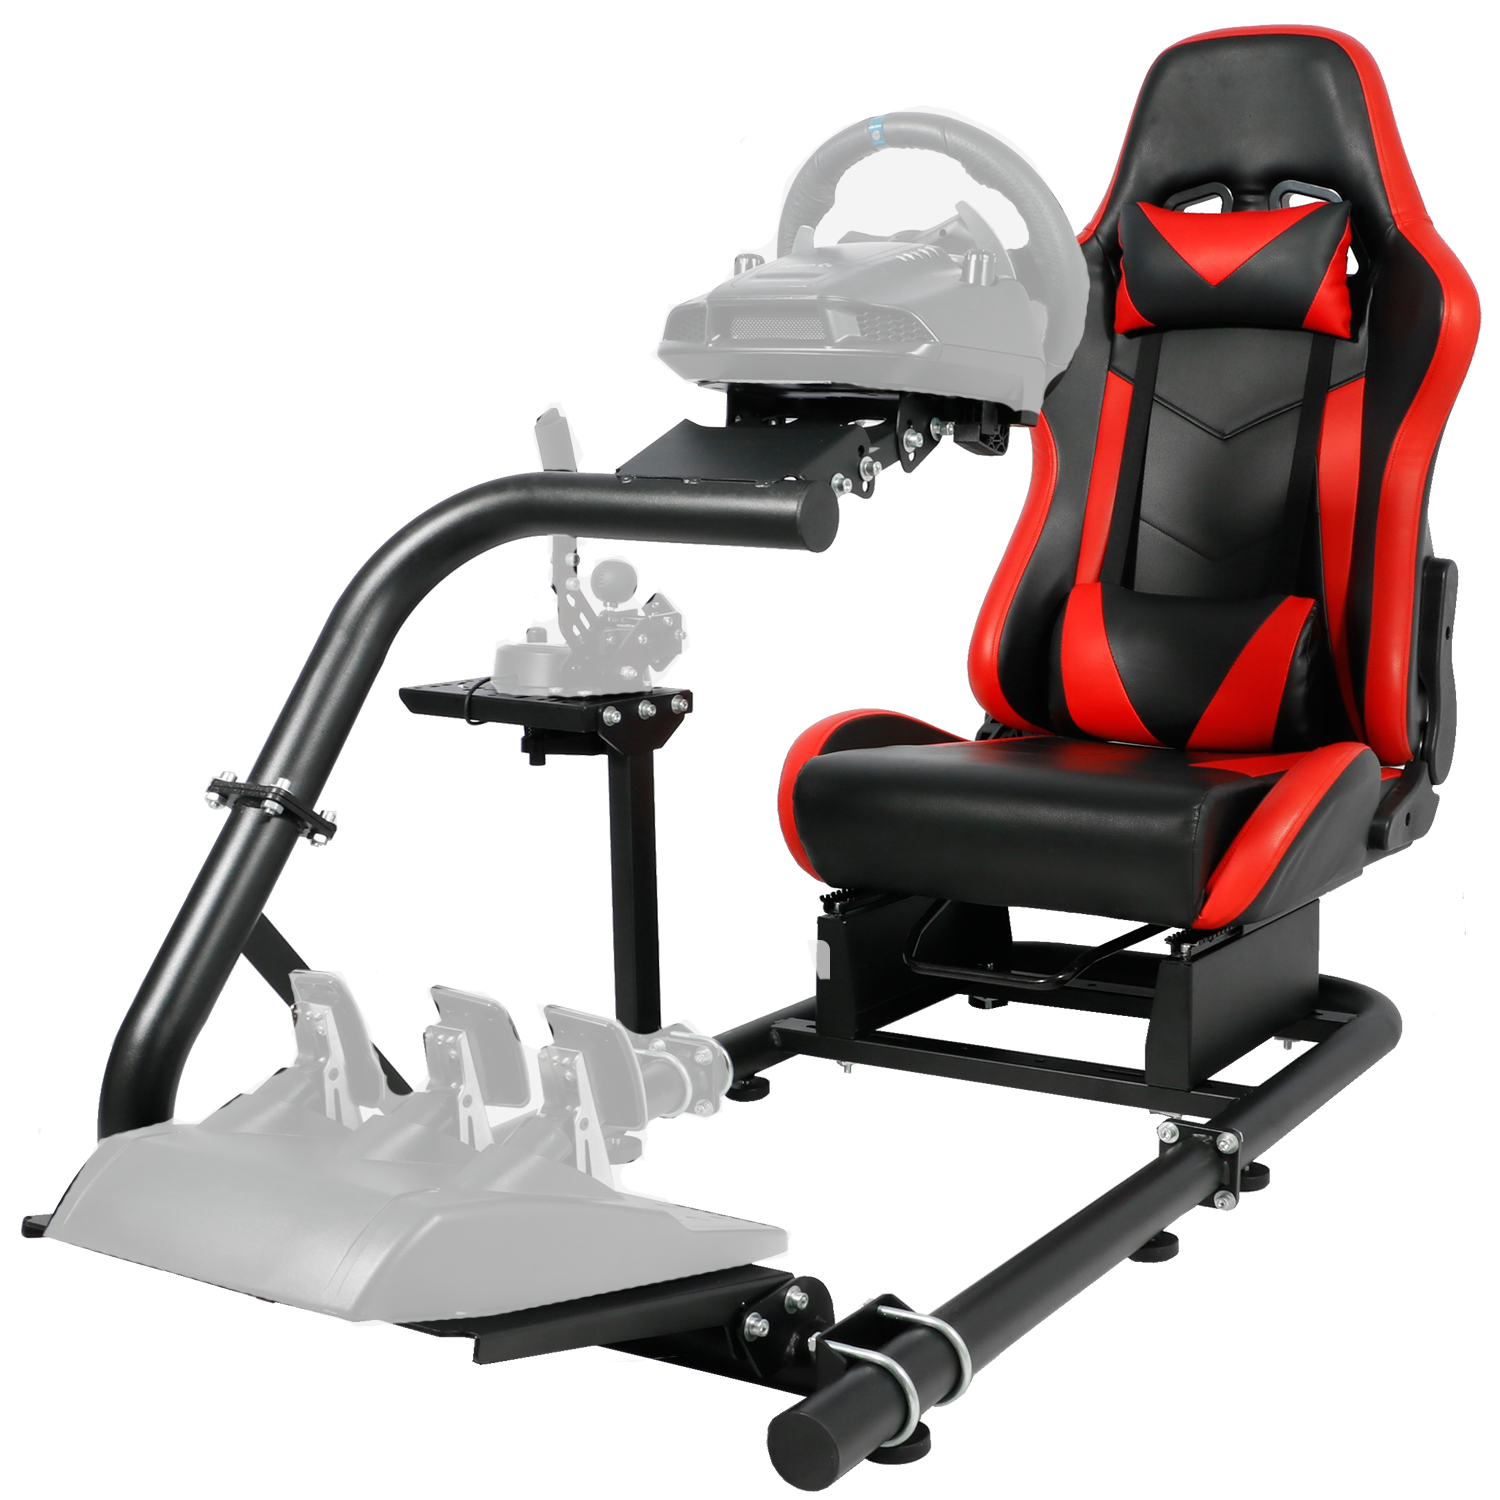 Minneer Sim Racing Cockpit with Seat Fit Logitech G29 G920 G923 Thrustmaster T300RS